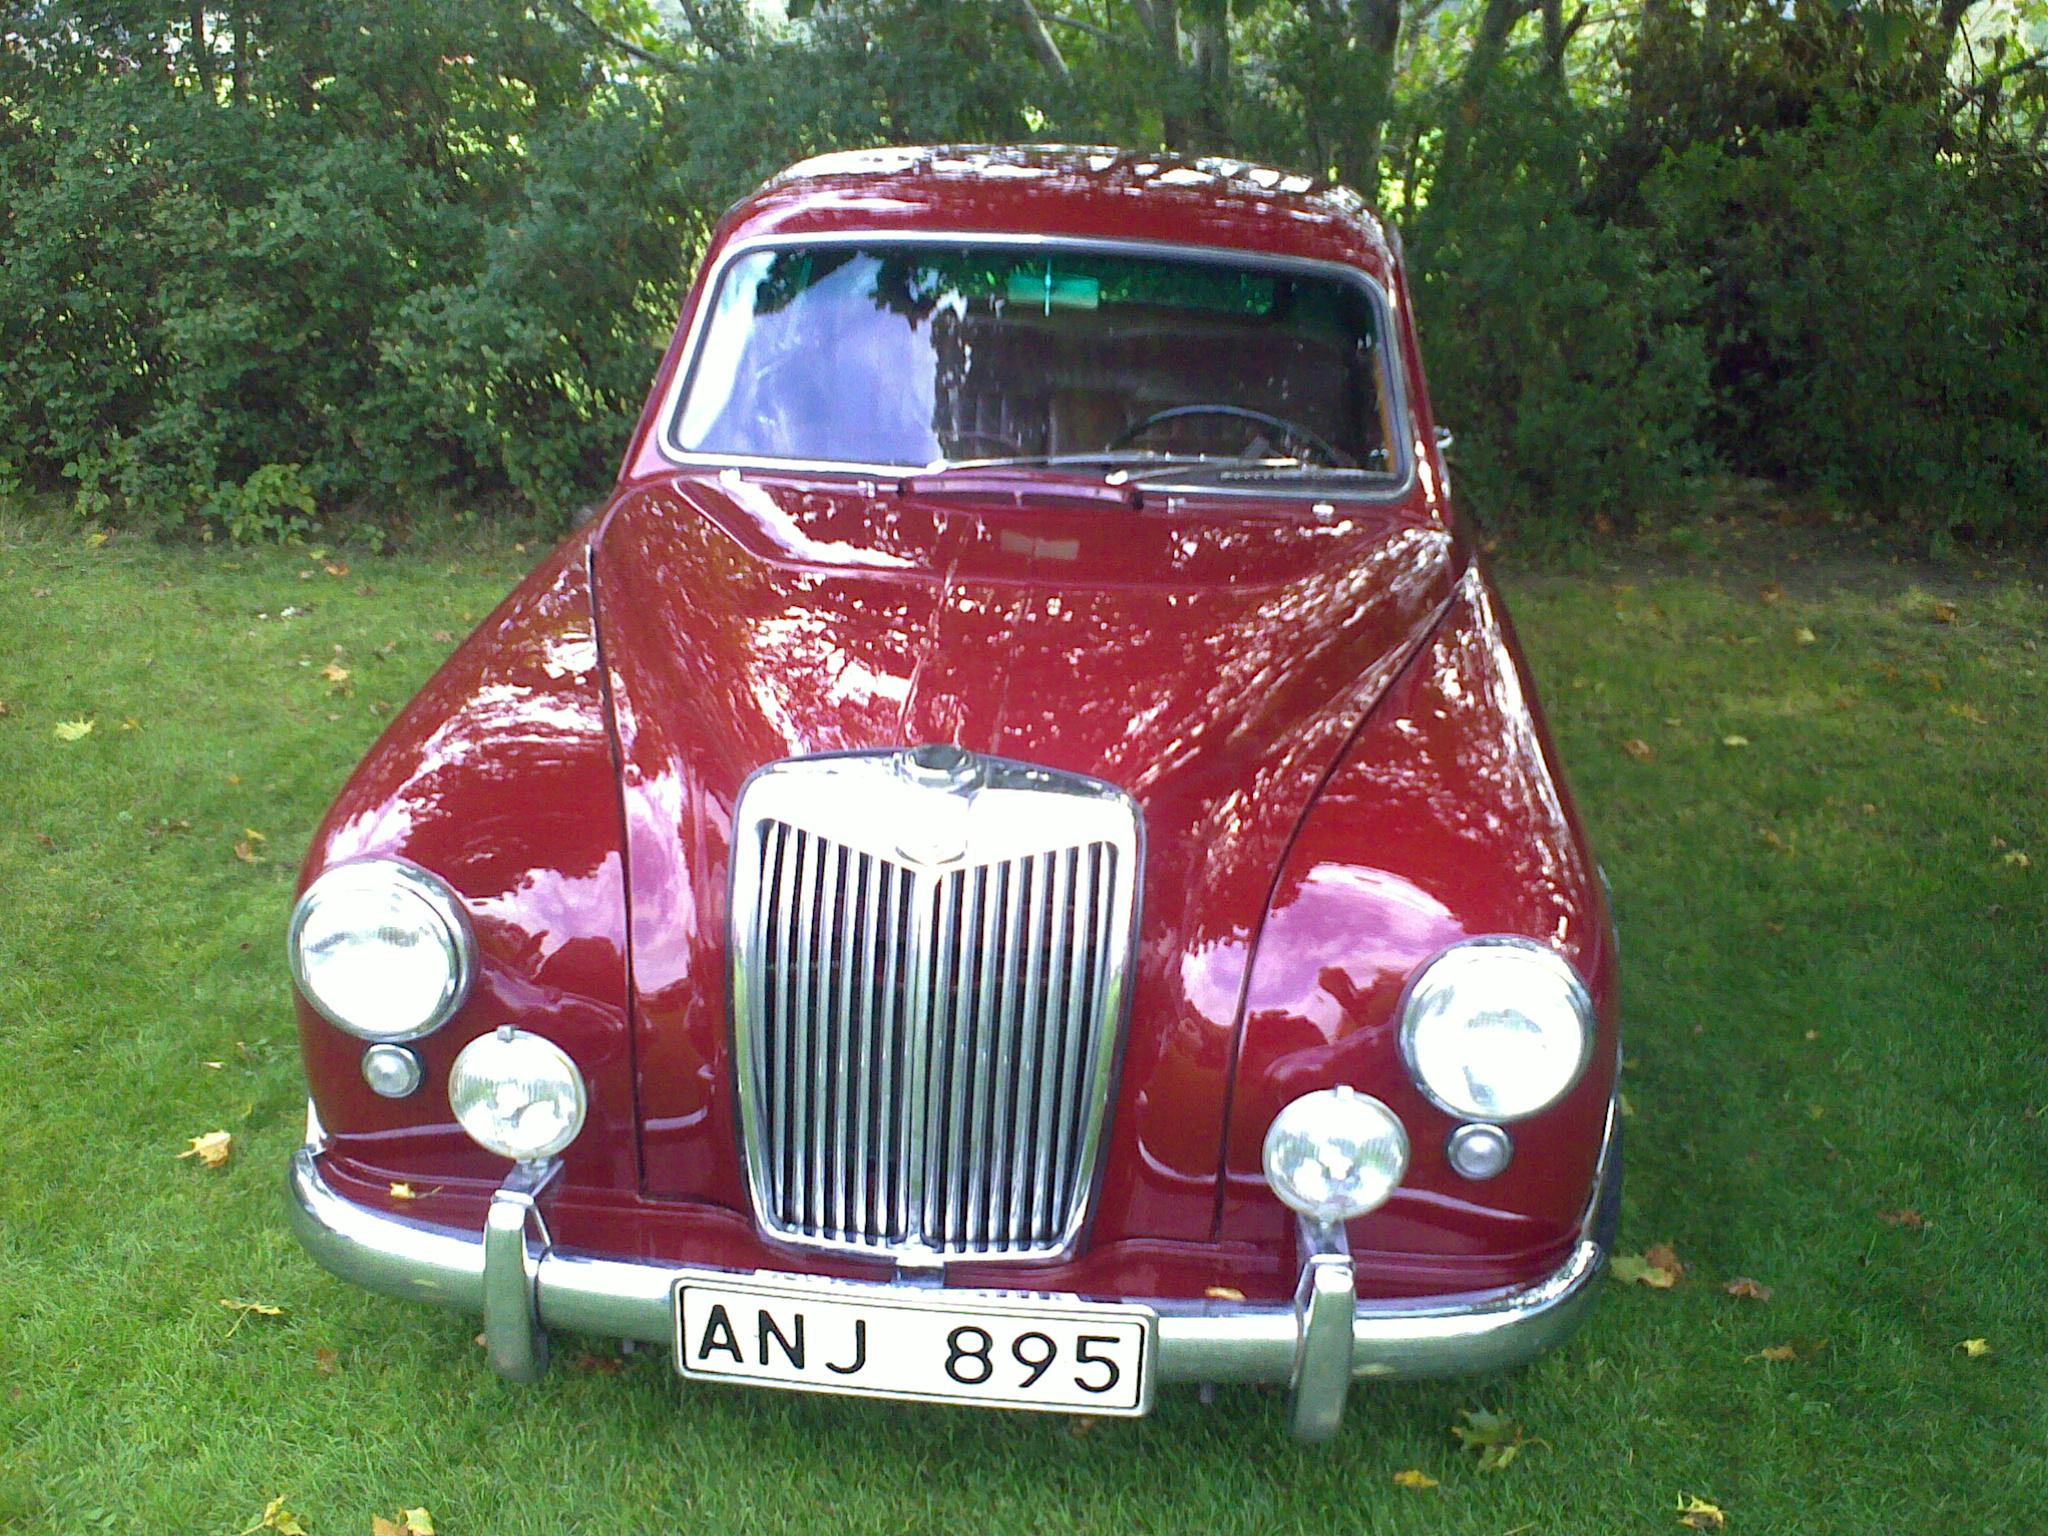 an antique red car sitting in the middle of the grass